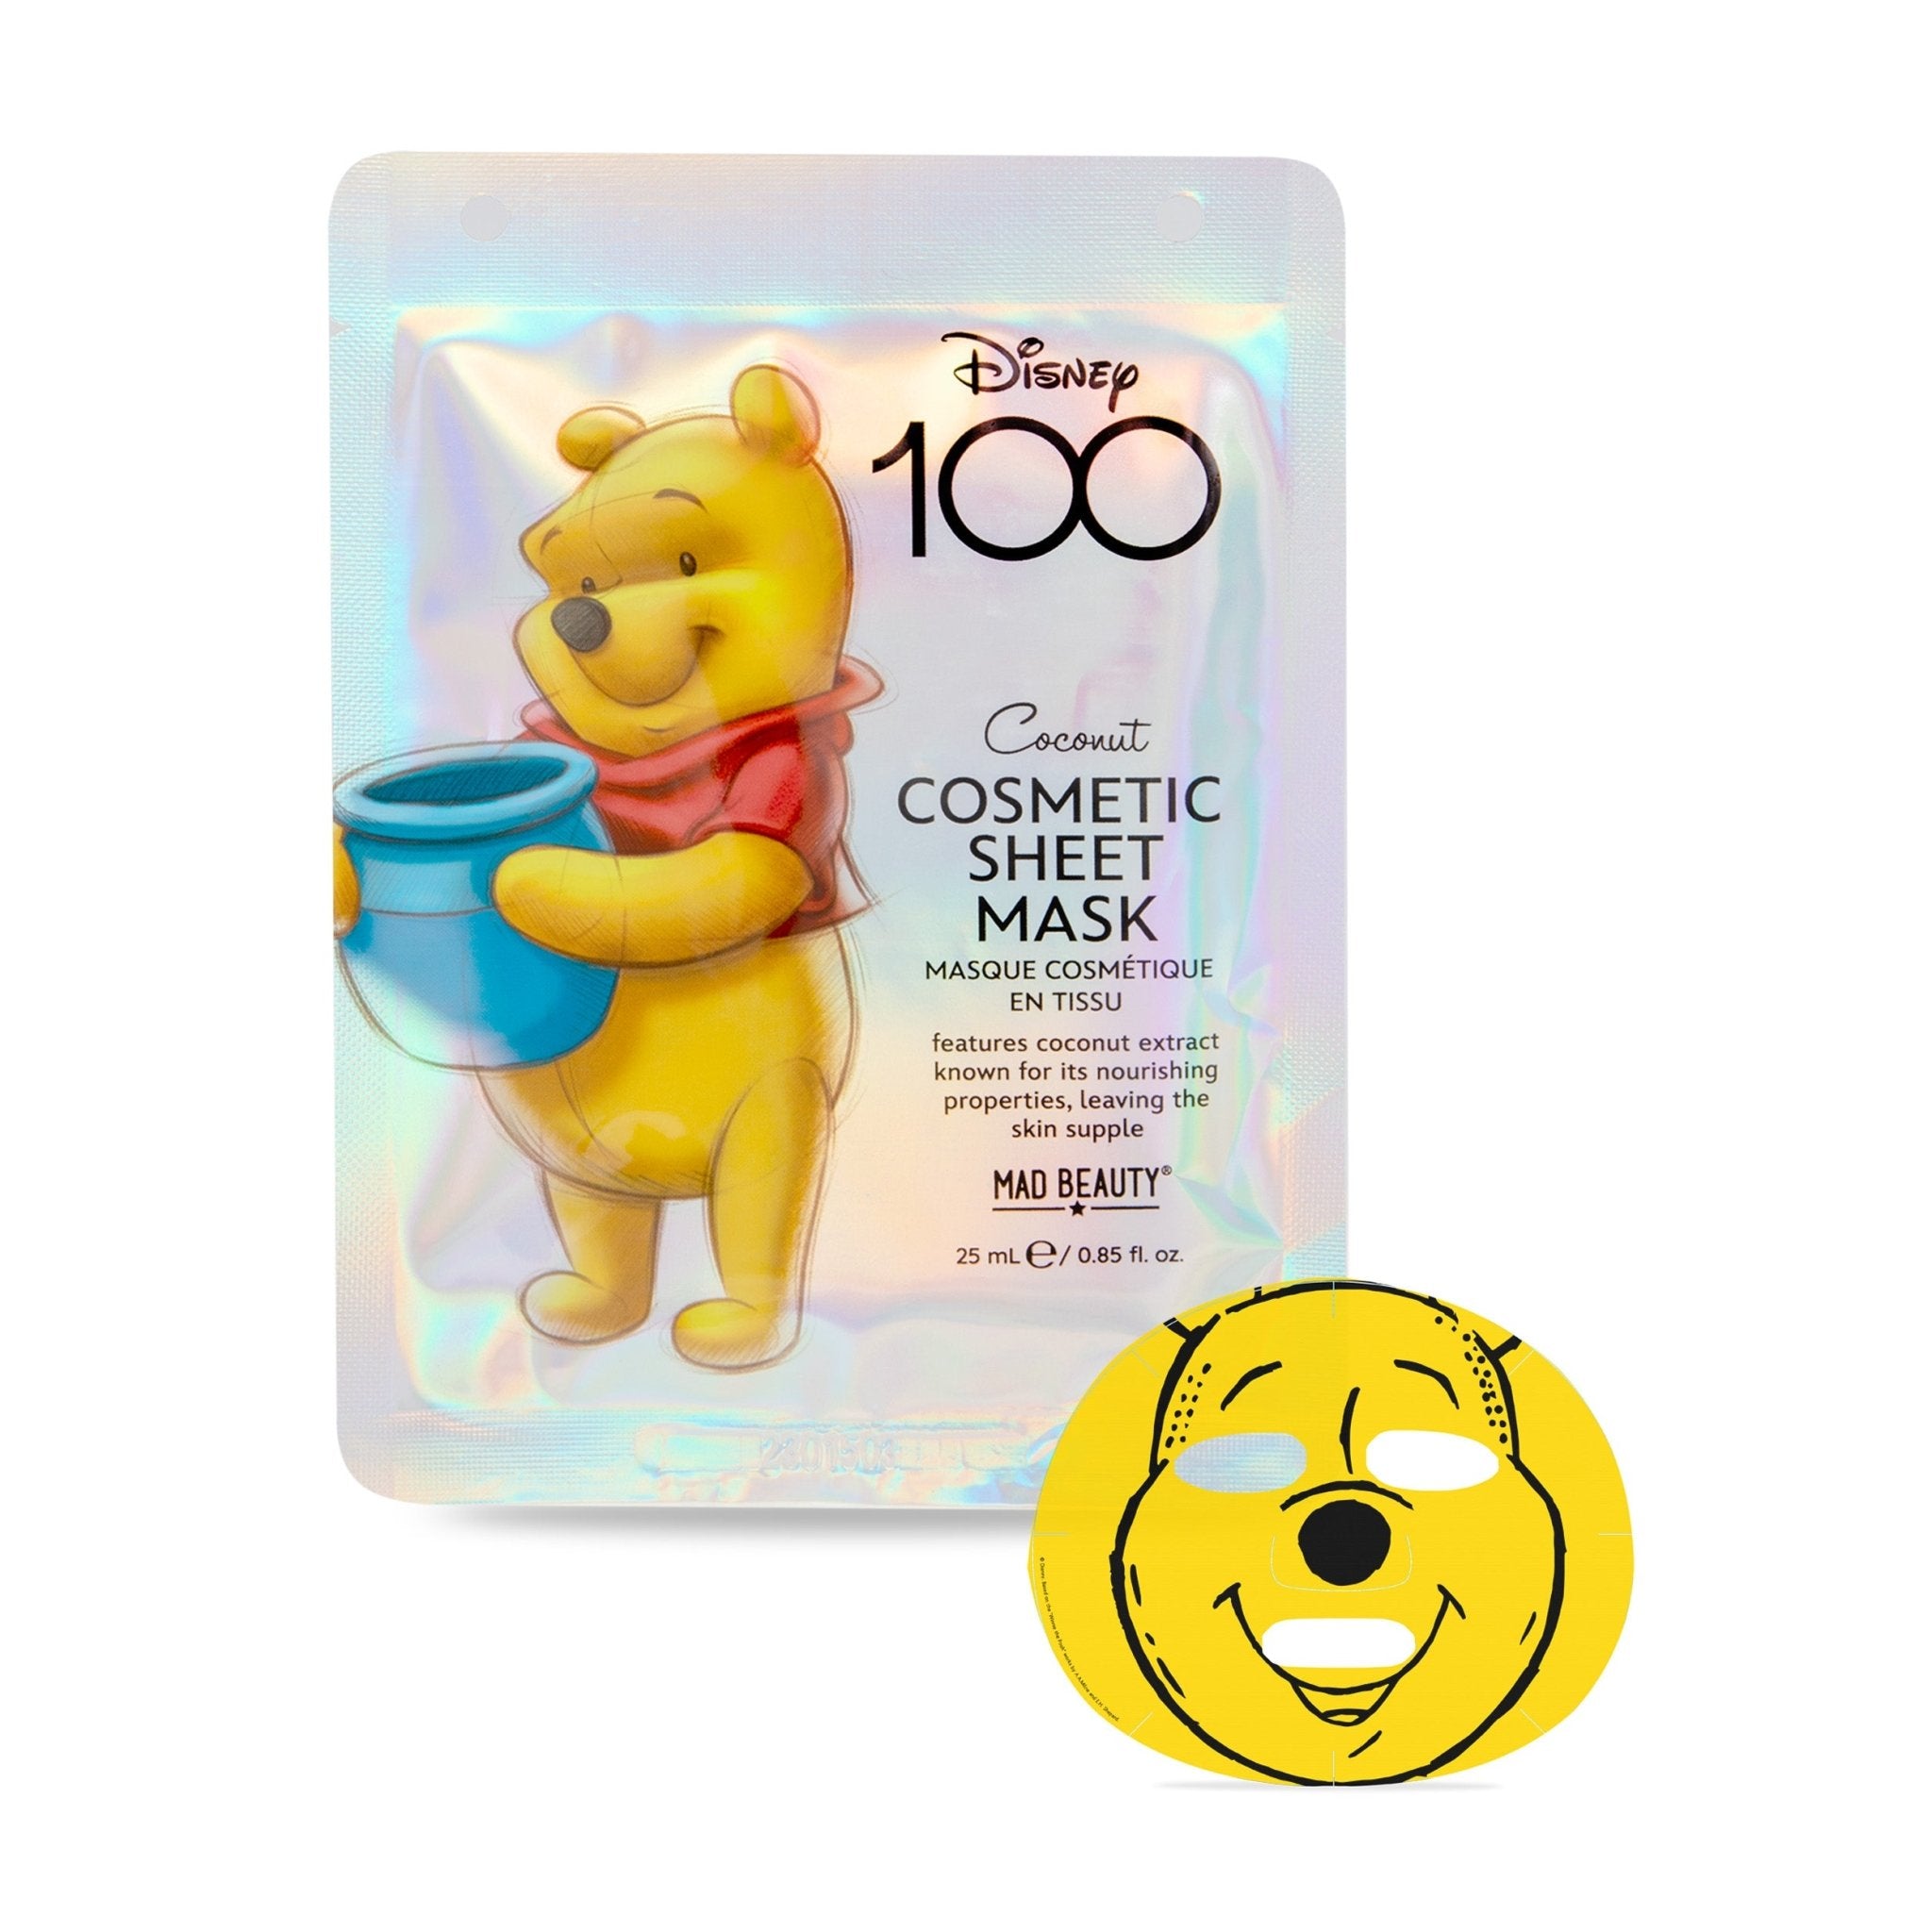 Shop Disney 100 Face Mask Duo - Premium Face Mask from Mad Beauty Online now at Spoiled Brat 